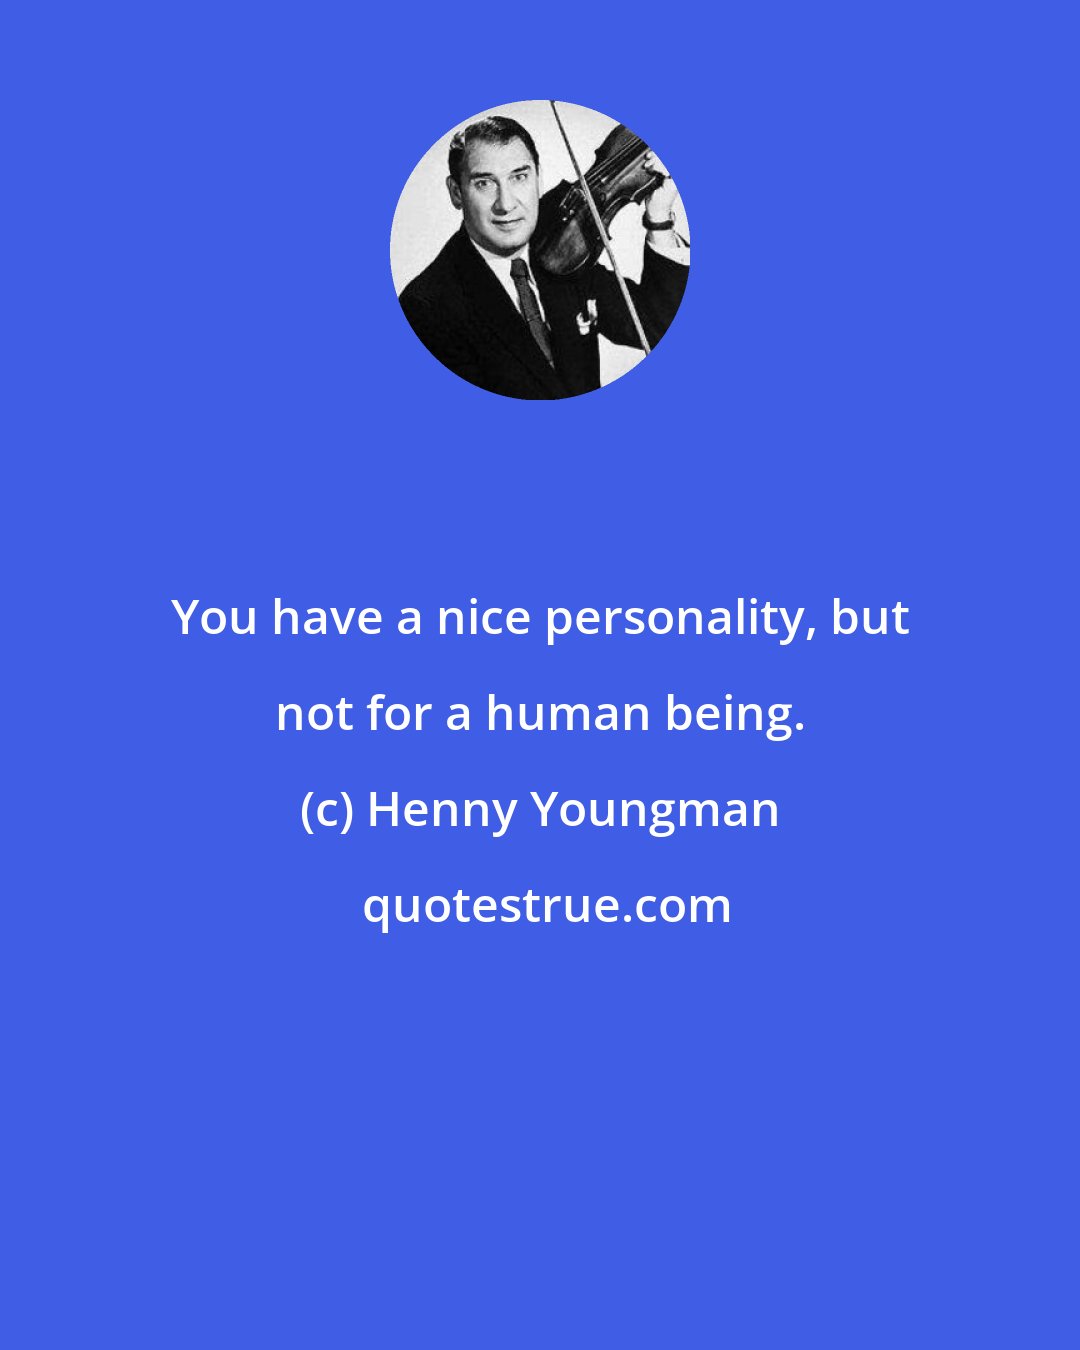 Henny Youngman: You have a nice personality, but not for a human being.